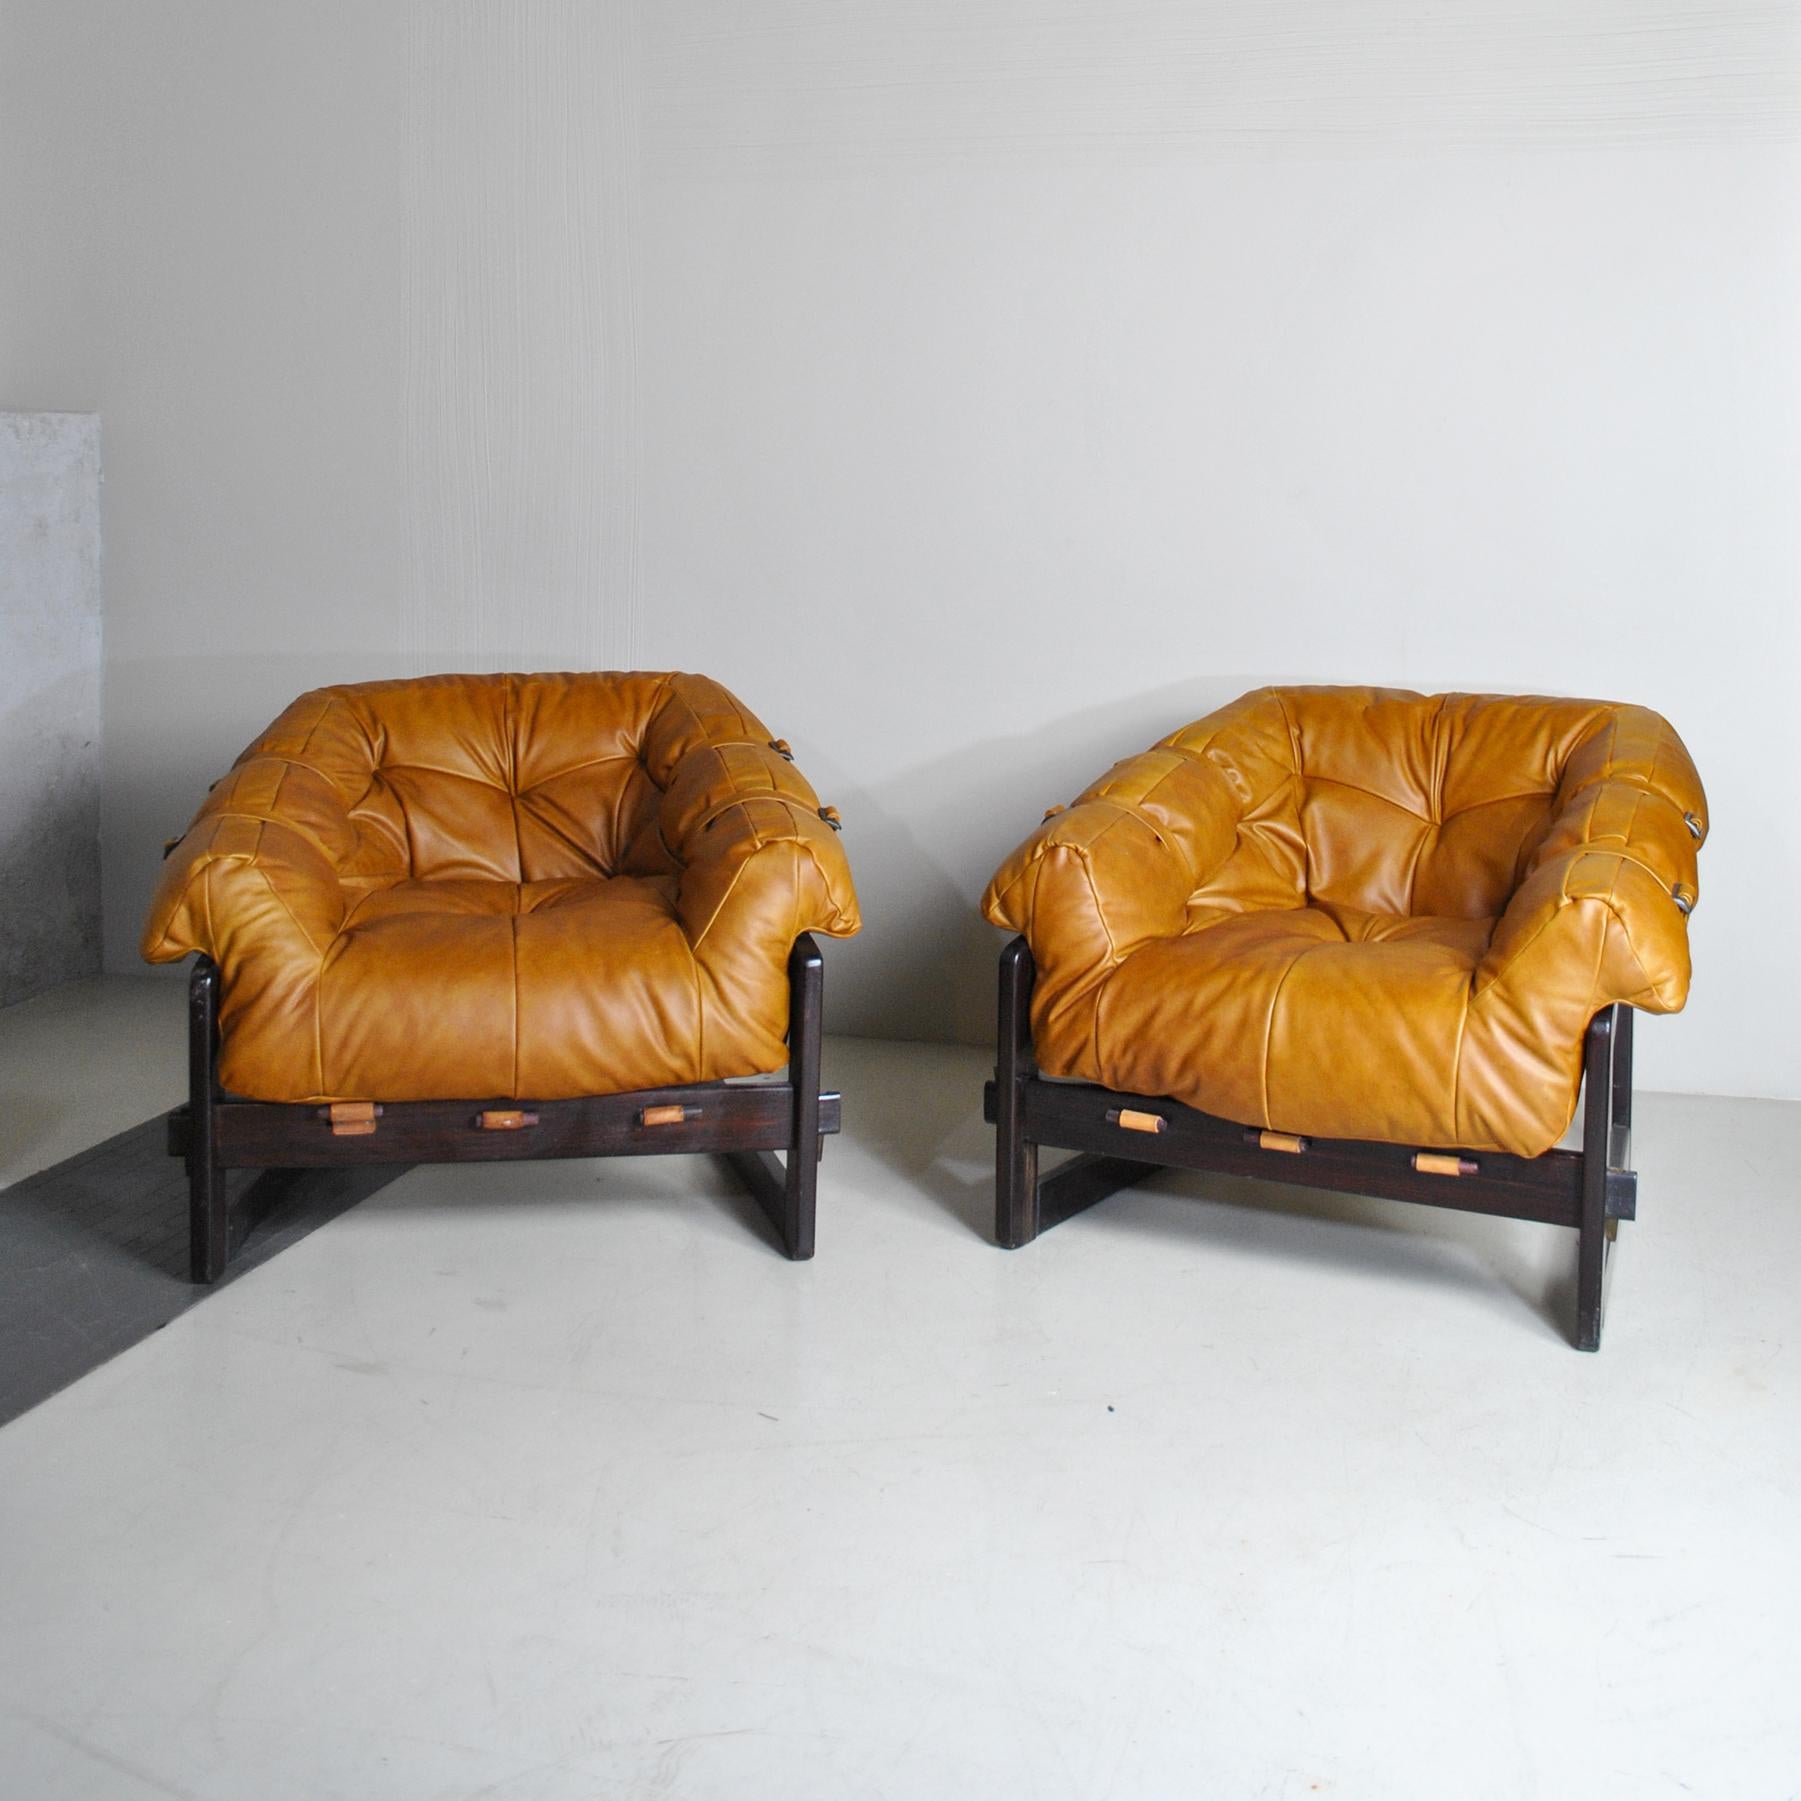 Fantastic vintage lounge chairs by Percival Lafer. Brazilian design and original leather. Really unique design and construction make this a true statement piece. the structure is very good but the skin and leather.